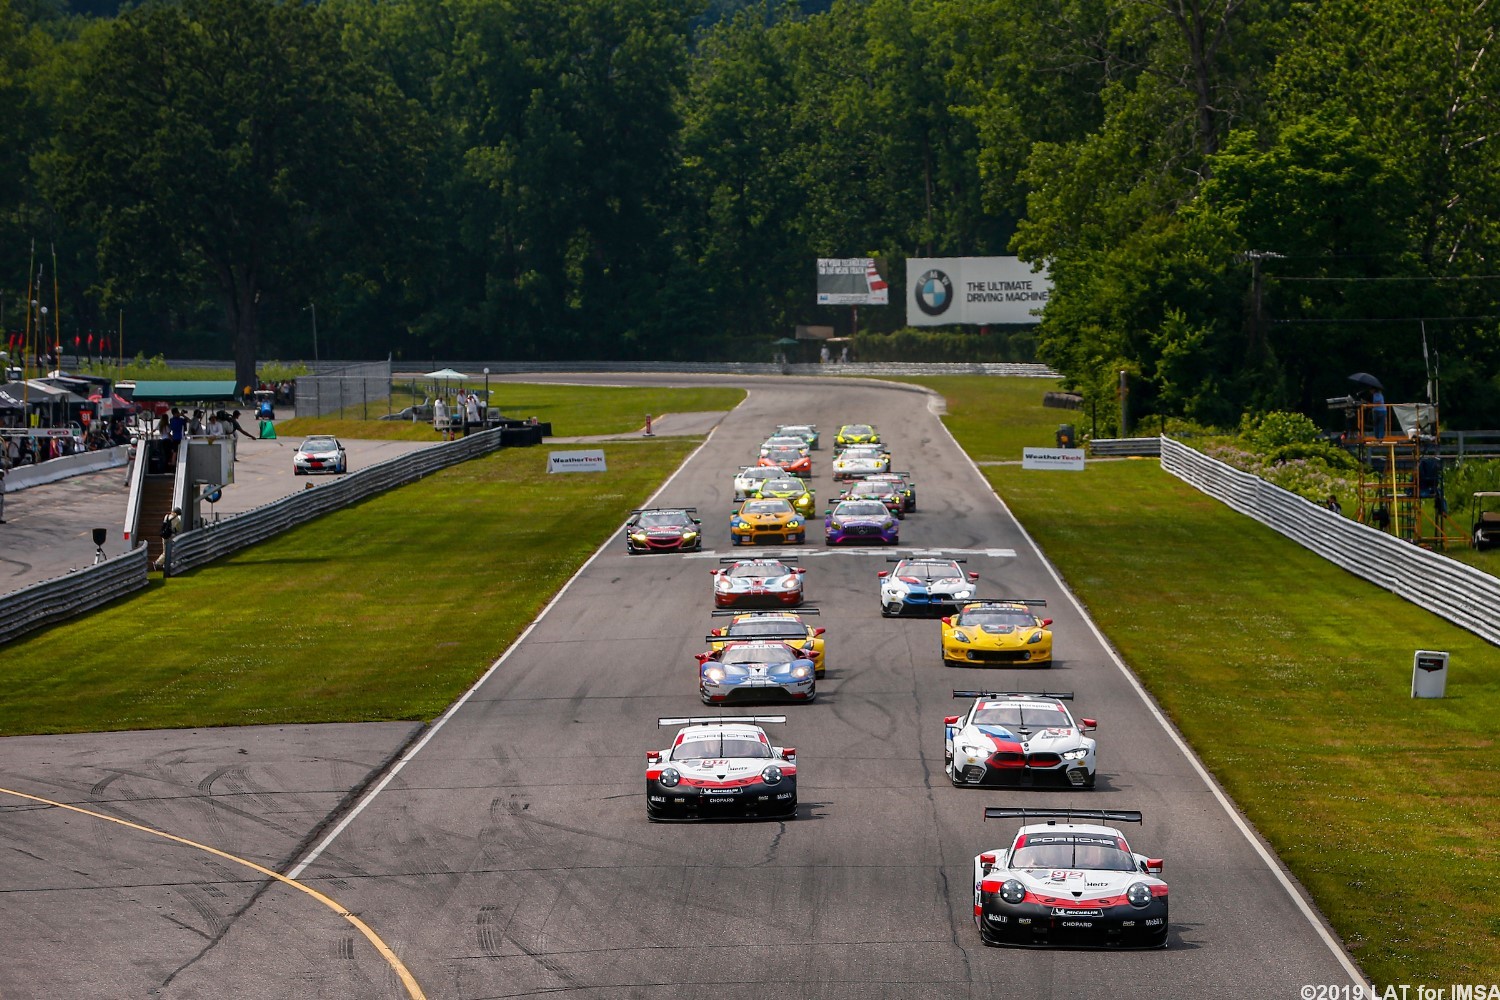 Yet another IMSA race moved from a blue state to a red state